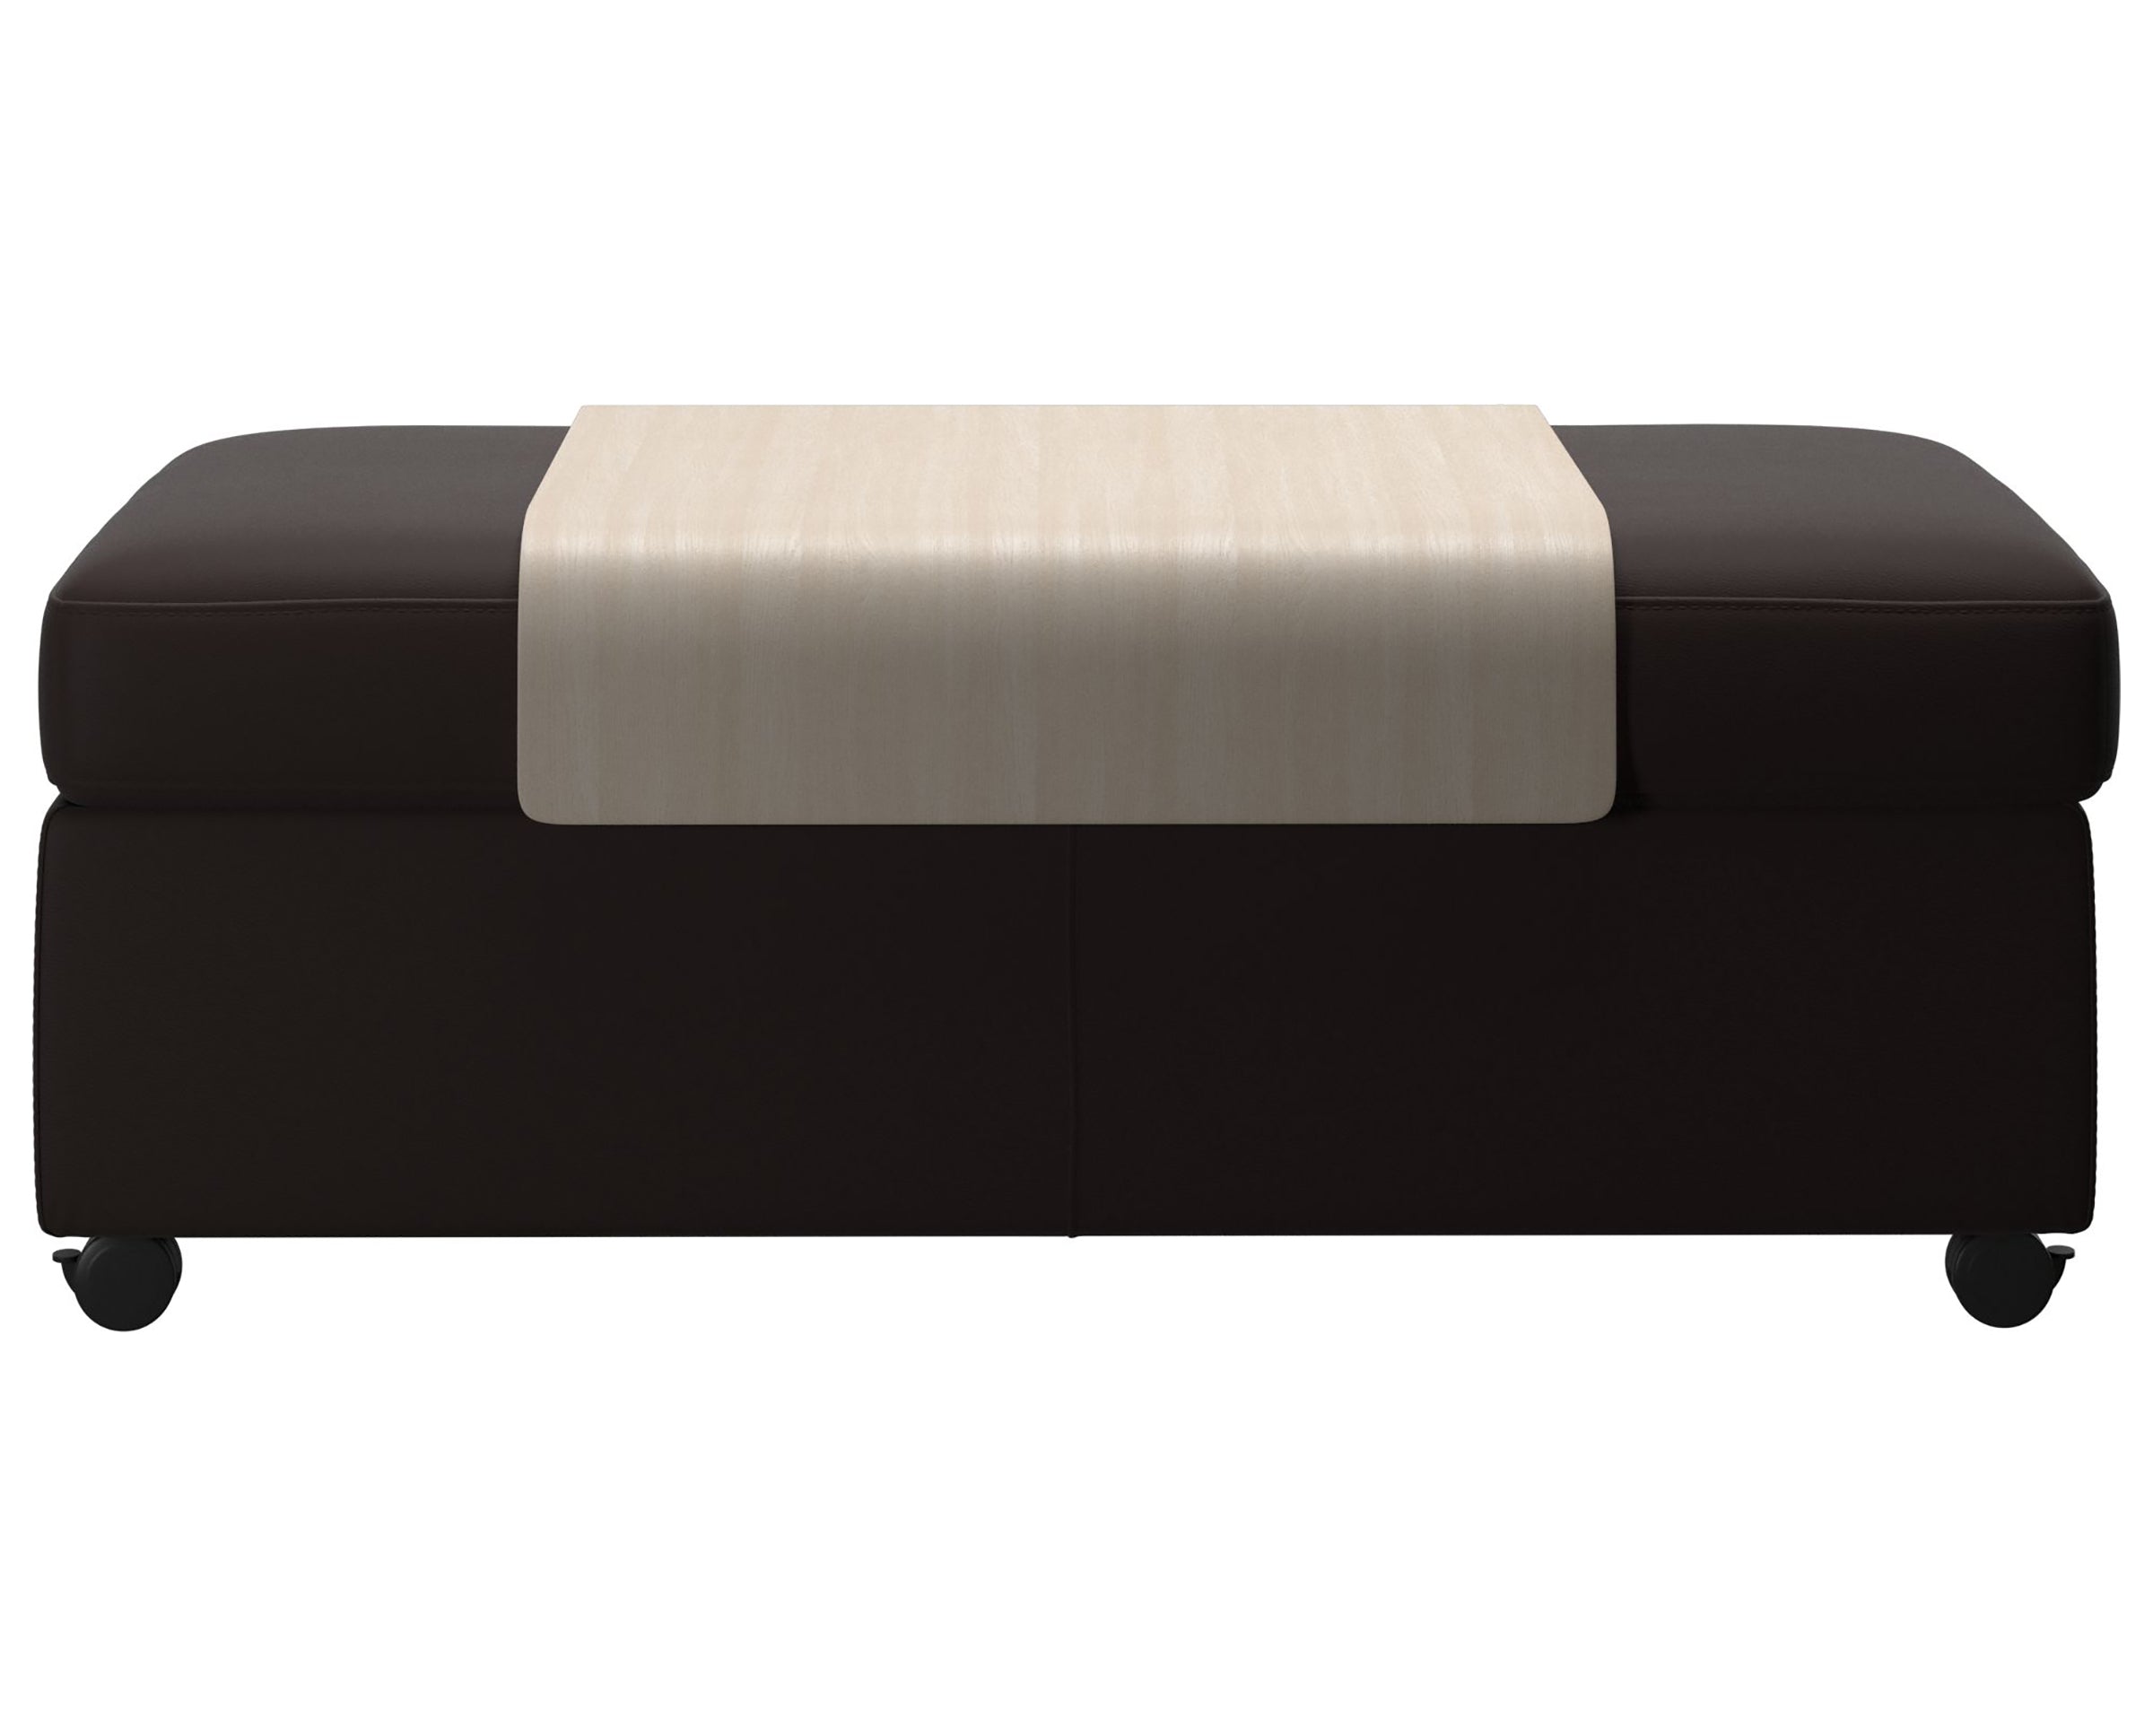 Paloma Leather Chocolate and Whitewash Finish | Stressless Double Ottoman with Table | Valley Ridge Furniture